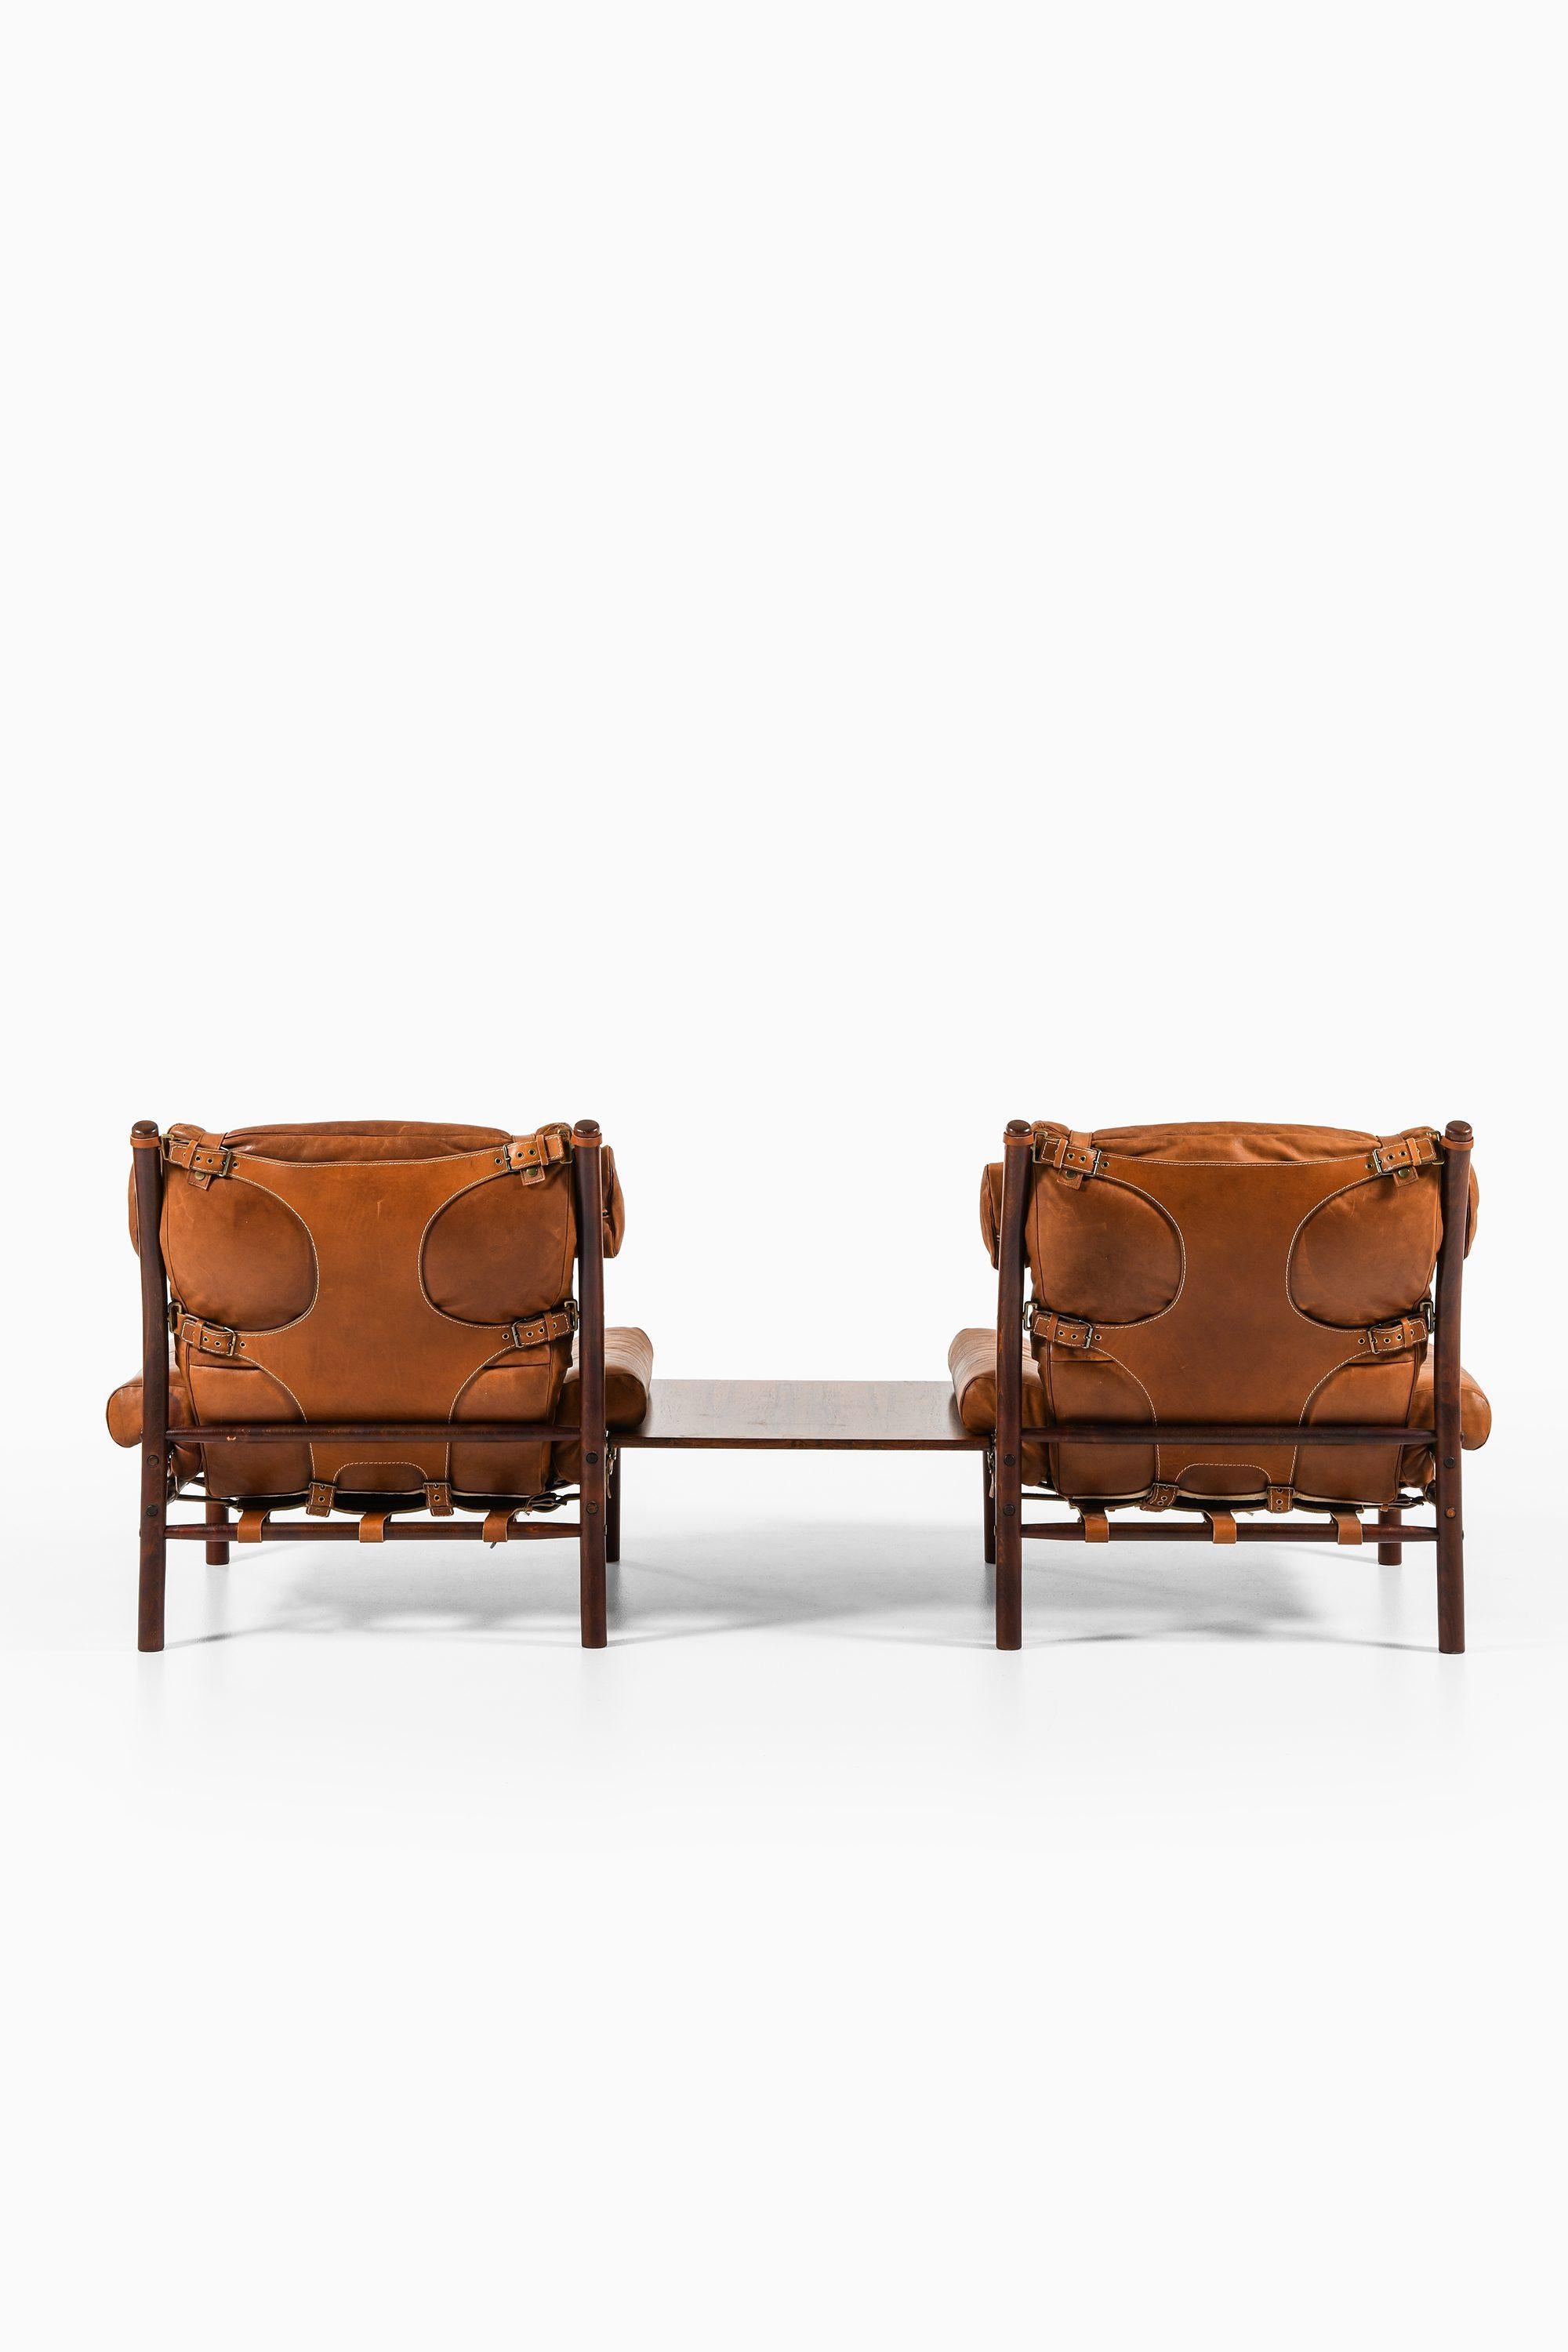 20th Century Pair of Easy Chairs with Side Table in Beech and Leather by Arne Norell, 1960s For Sale